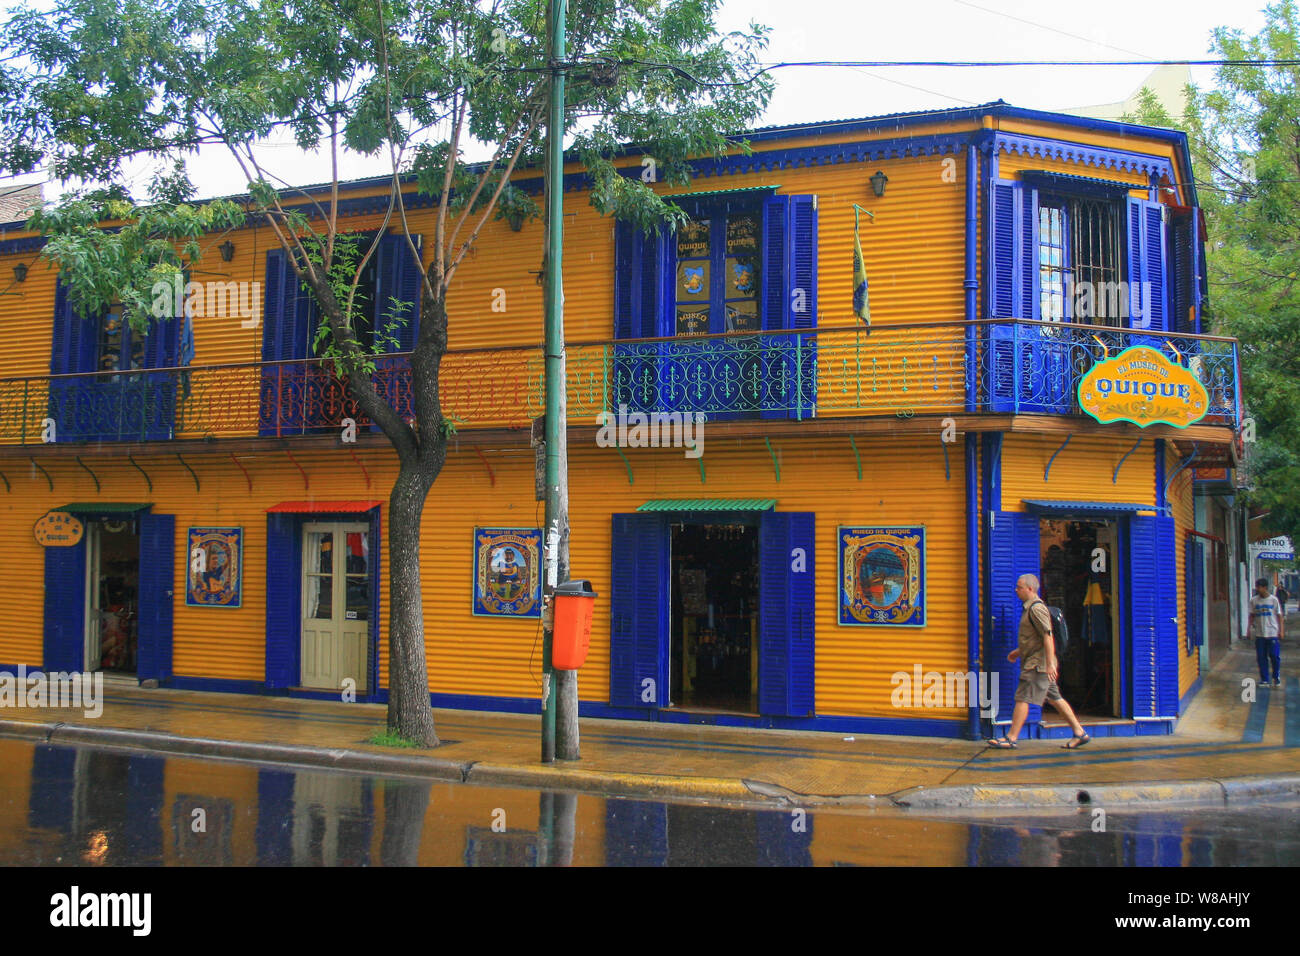 Buenos Aires, January 22, 2010: The Museo de Quique, traditional soccer museum near and with the colors of Boca Juniors club at La Boca Stock Photo